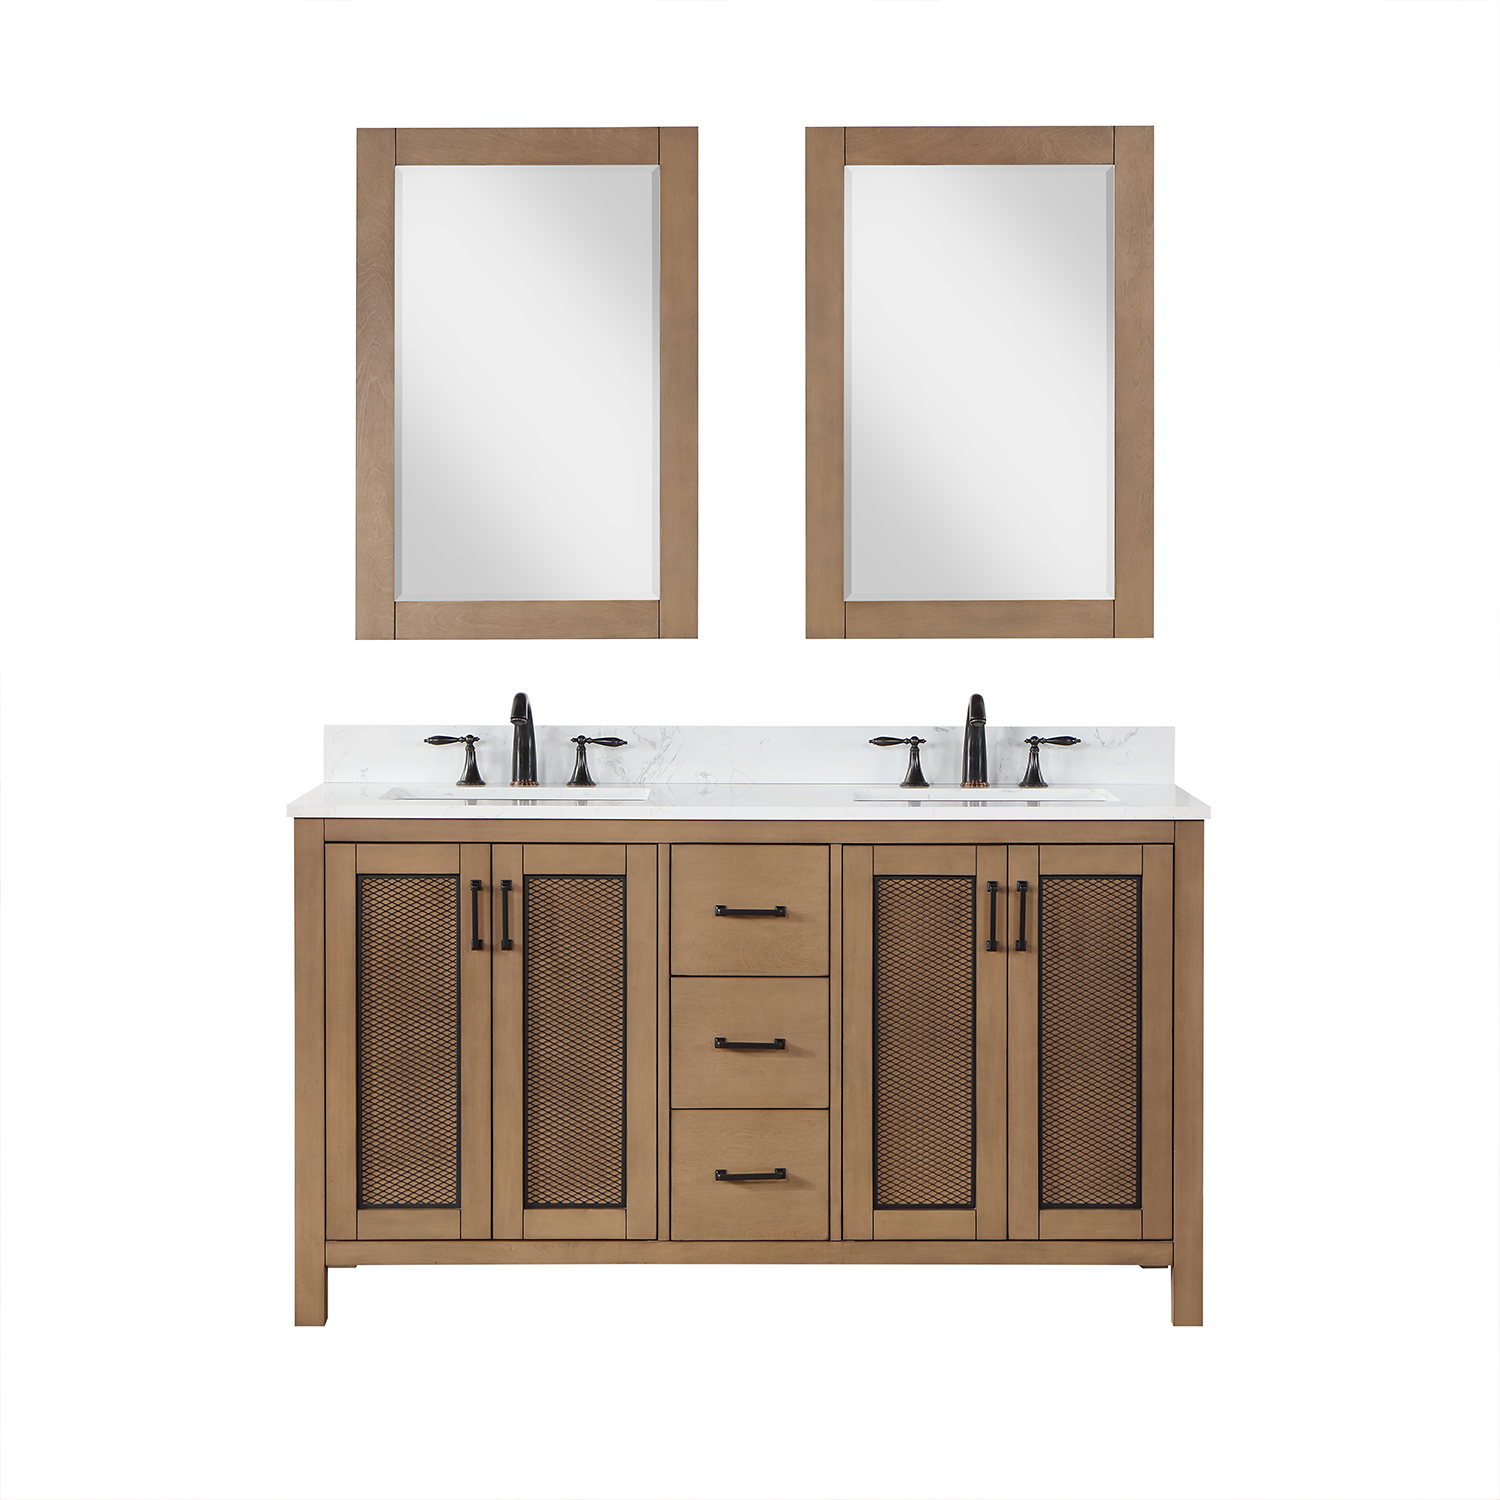 Issac Edwards Collection 60" Double Bathroom Vanity Set in Brown Pine with Carrara White Composite Stone Countertop without Mirror 